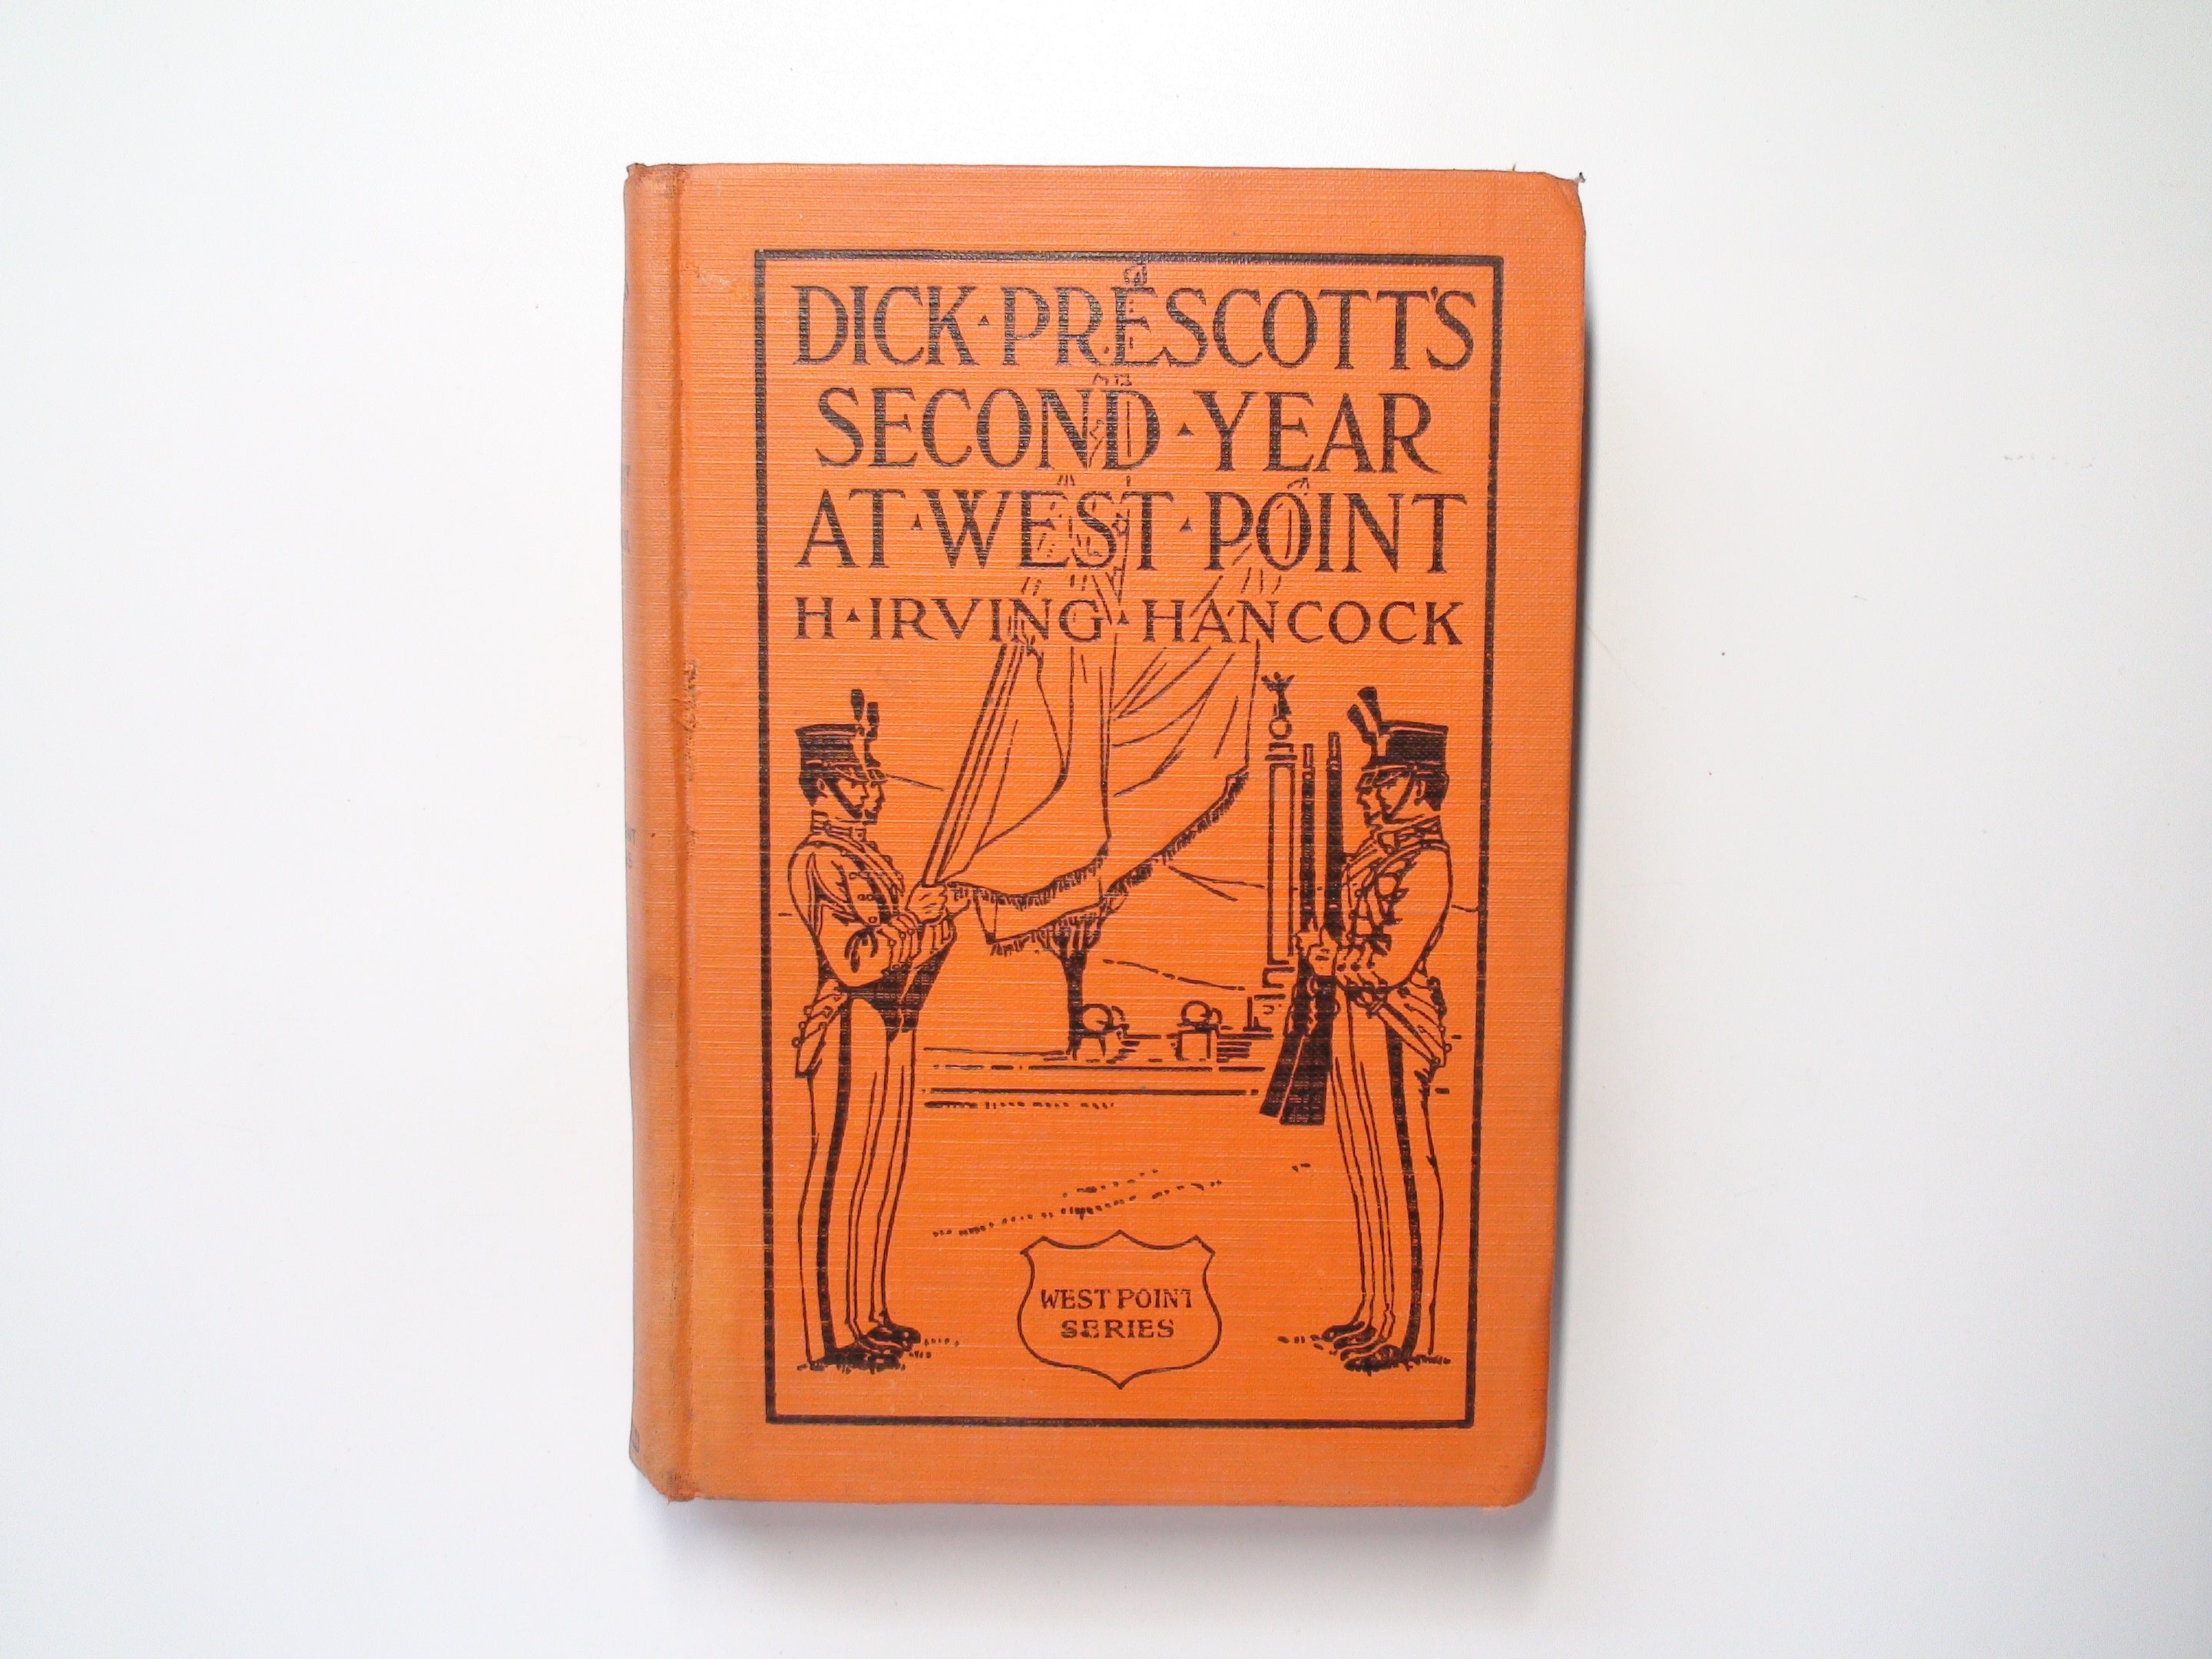 Dick Prescott's Second Year at West Point, H. Irving Hancock, 1st Ed, 1911